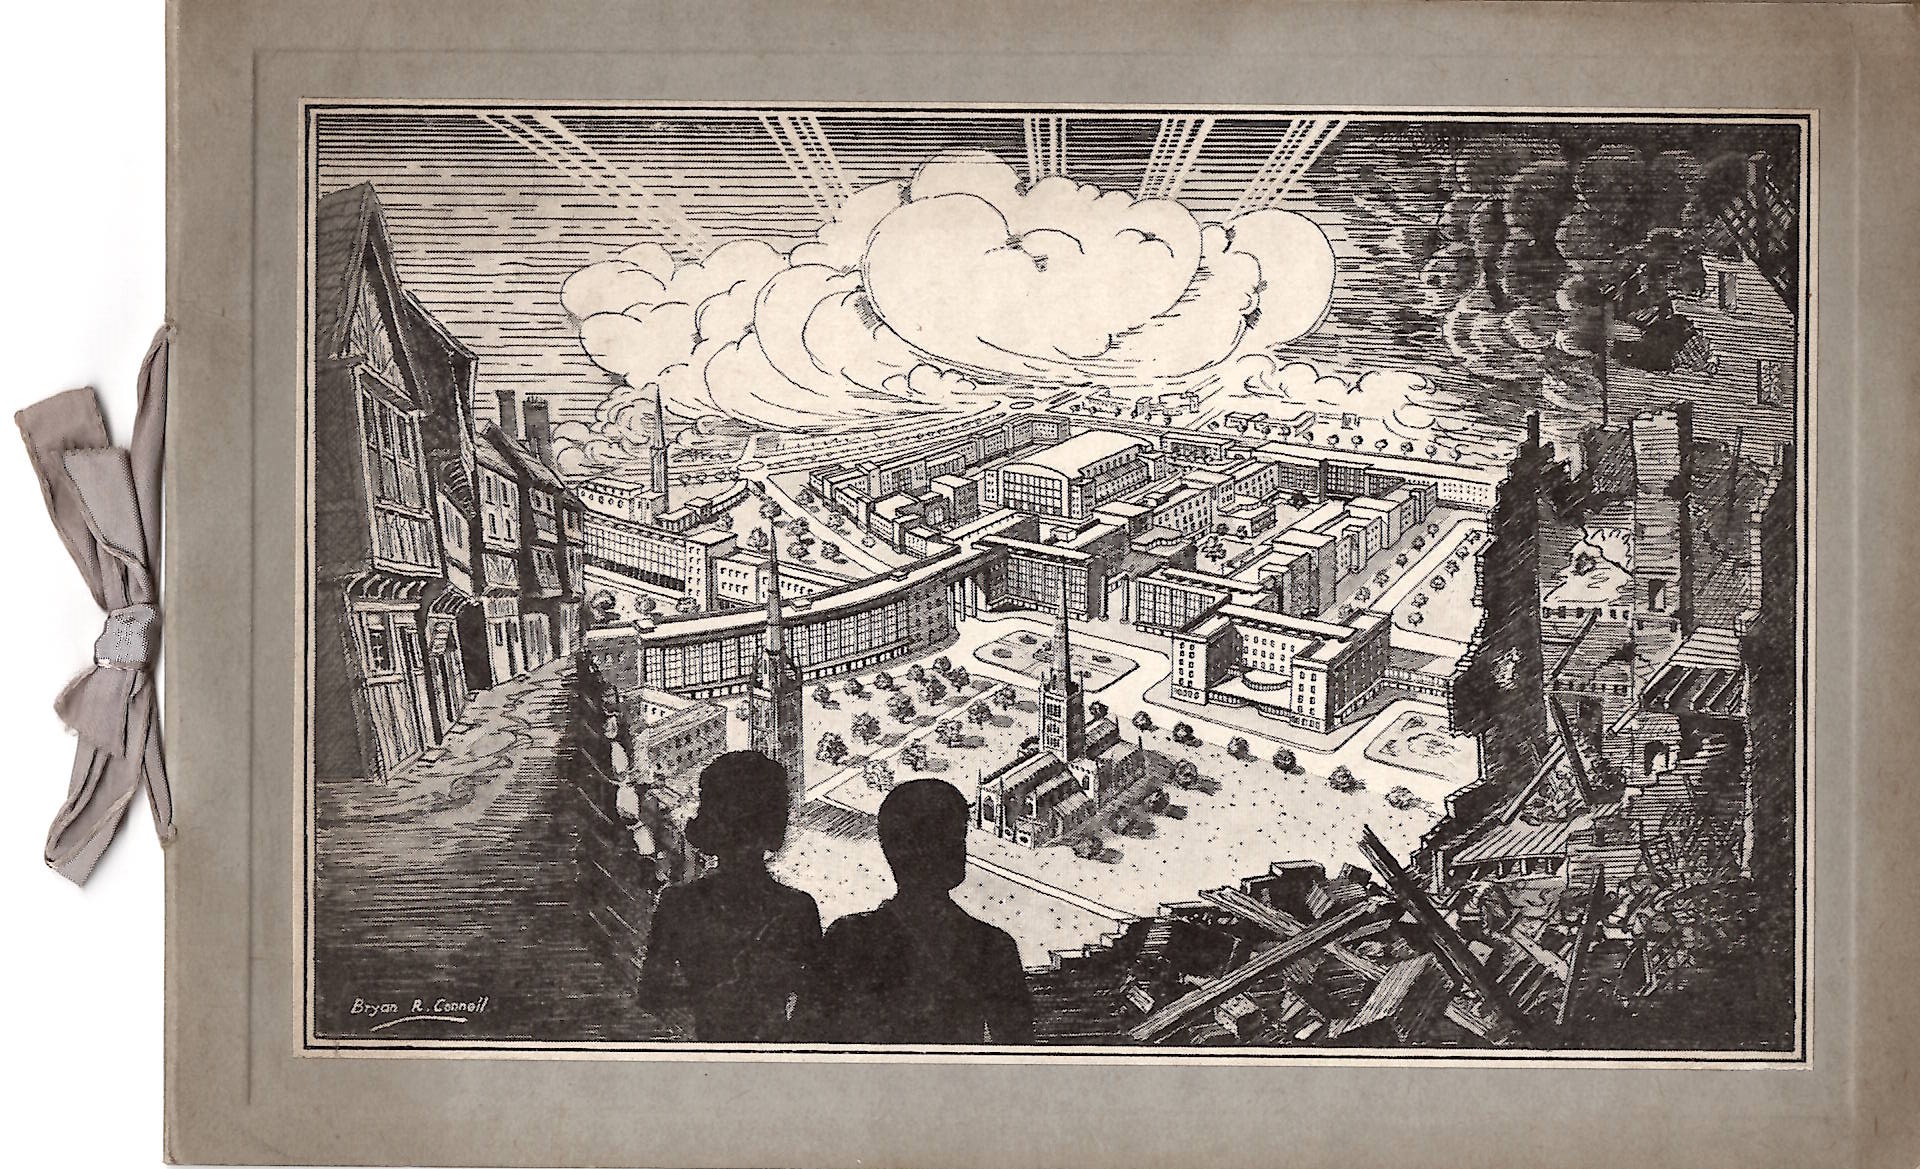 The second card referenced in the text, with a black and white sketch of two silhouetted figures looking down on a reimagined, rebuilt Coventry city centre, from the bombed ruins of the wartime city. The card is tied on one side with ribbon.